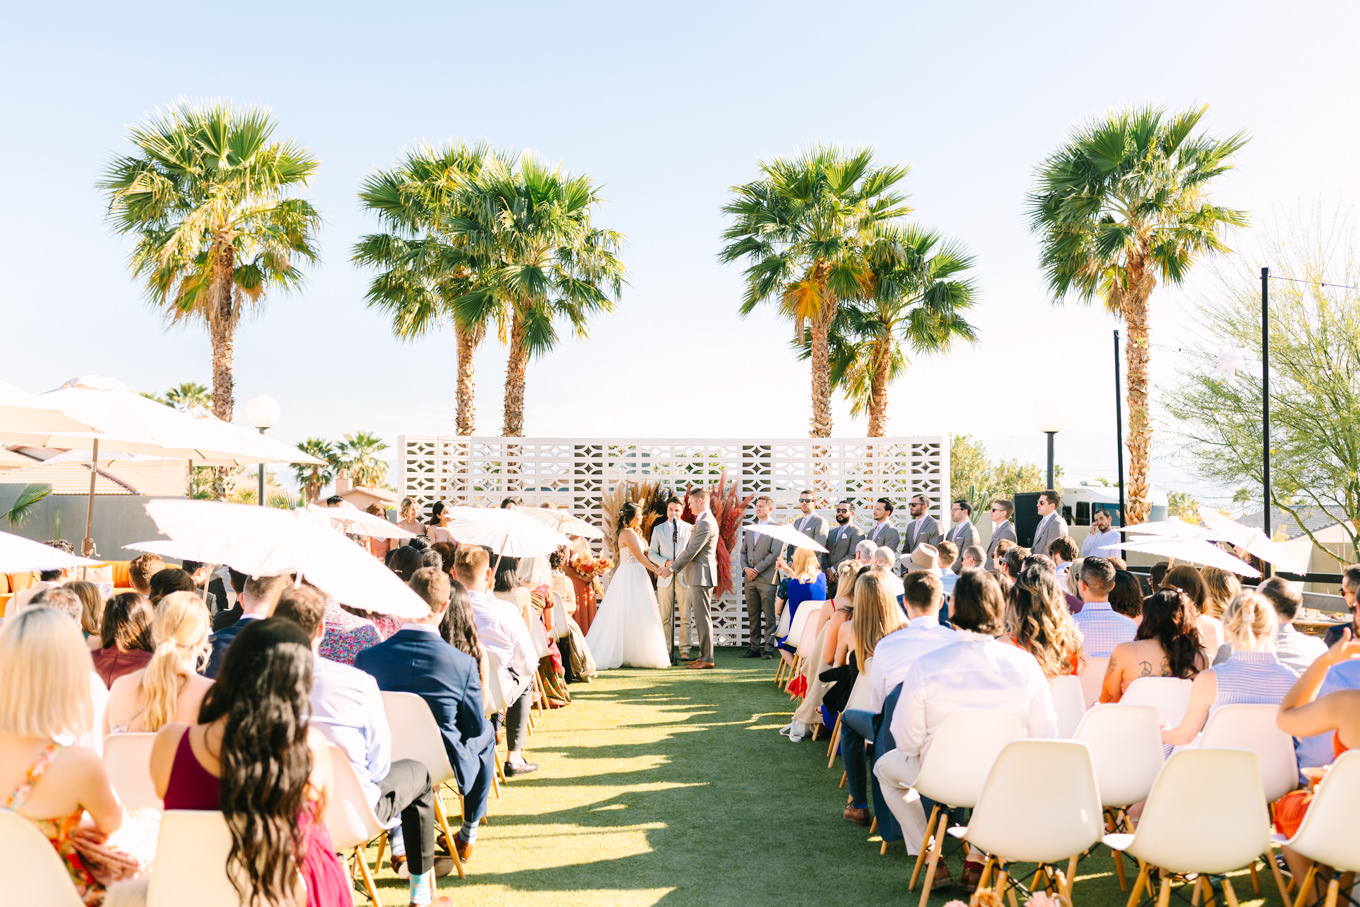 Wedding ceremony on white breeze block wall with palm trees | Pink and orange Lautner Compound wedding | Colorful Palm Springs wedding photography | #palmspringsphotographer #palmspringswedding #lautnercompound #southerncaliforniawedding  Source: Mary Costa Photography | Los Angeles